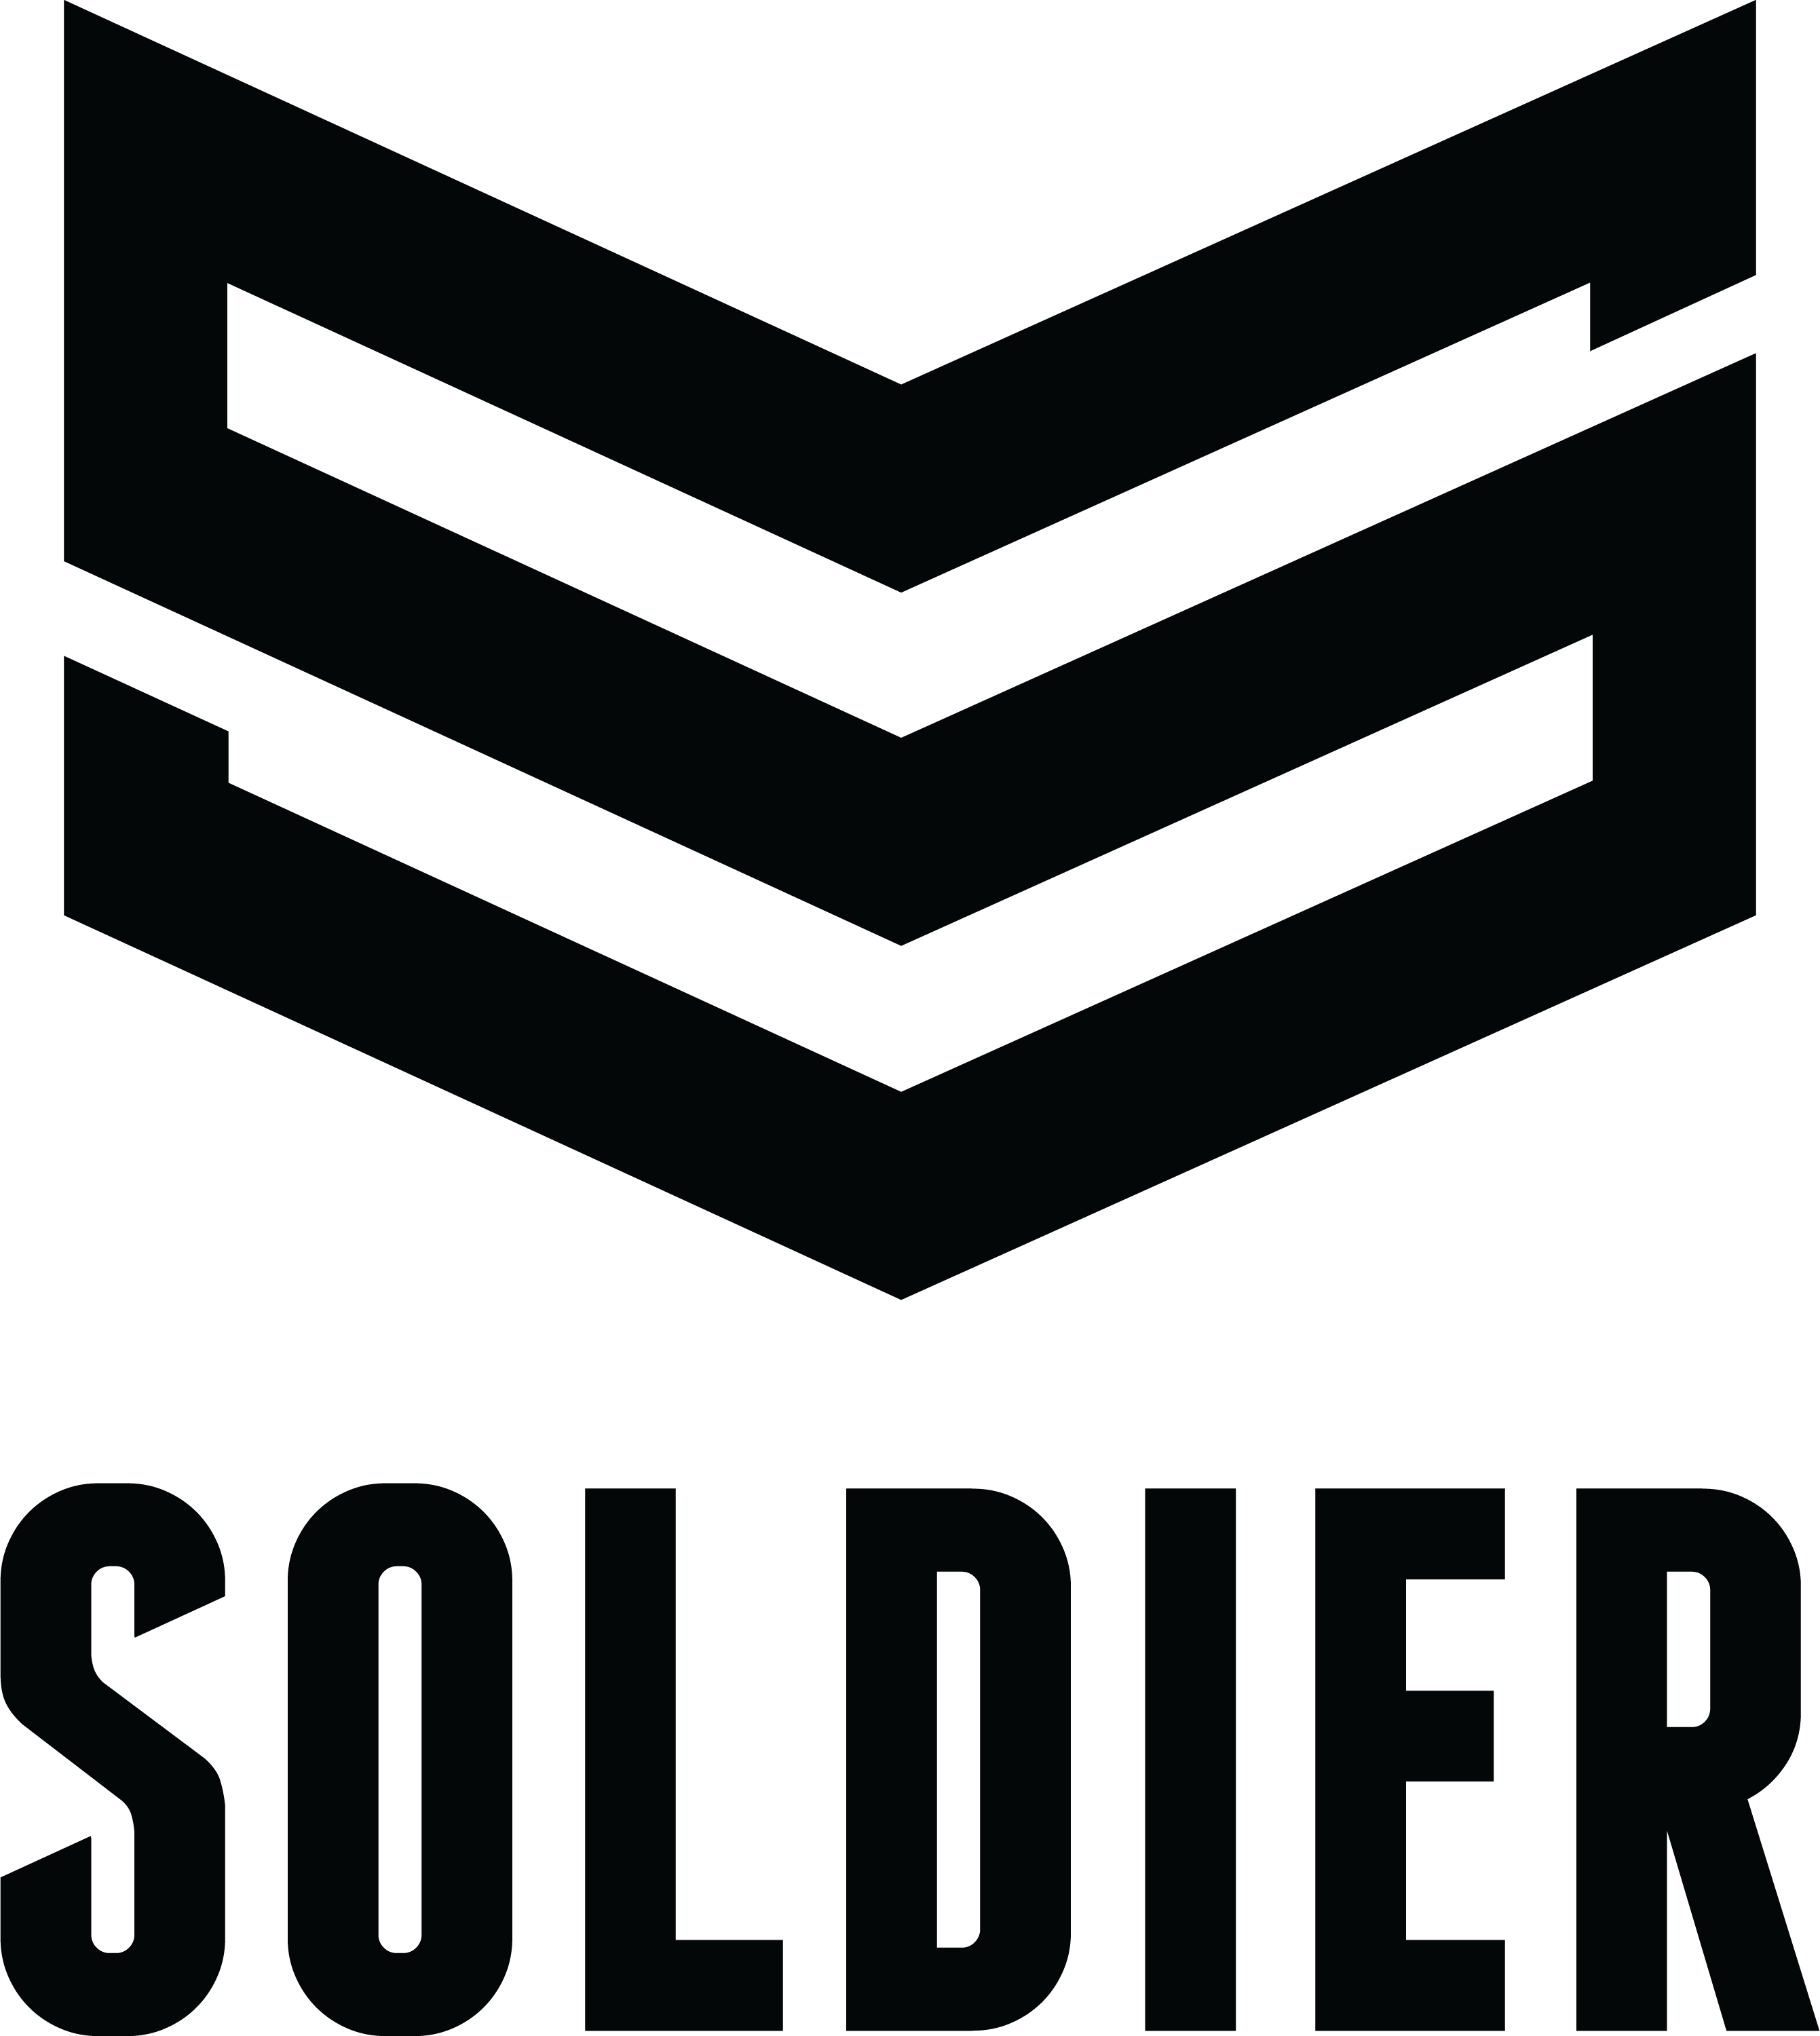 Soldier Sports Elite Air Football Mouthguard